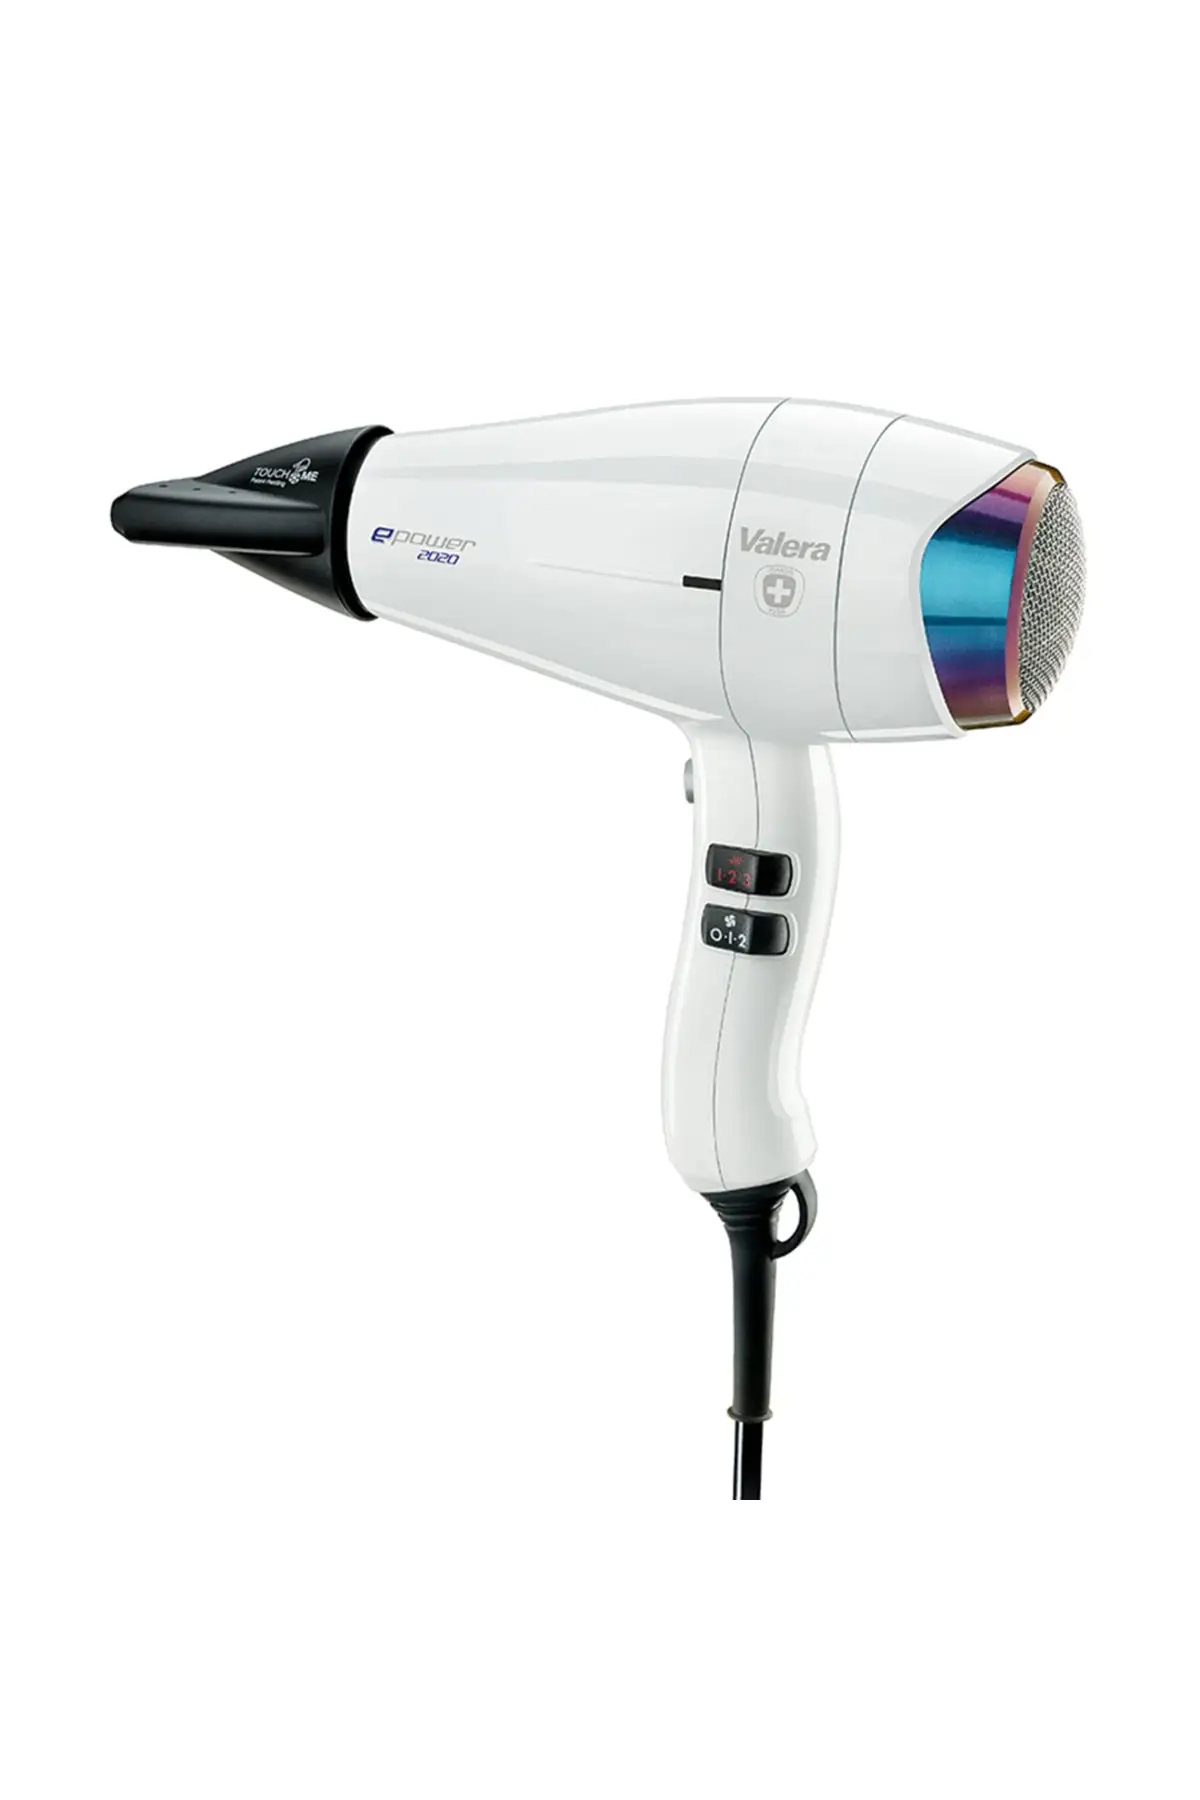 

Epower Ep2030 Eq Rc removable diffuser professional ionic hair dryer 1600 W